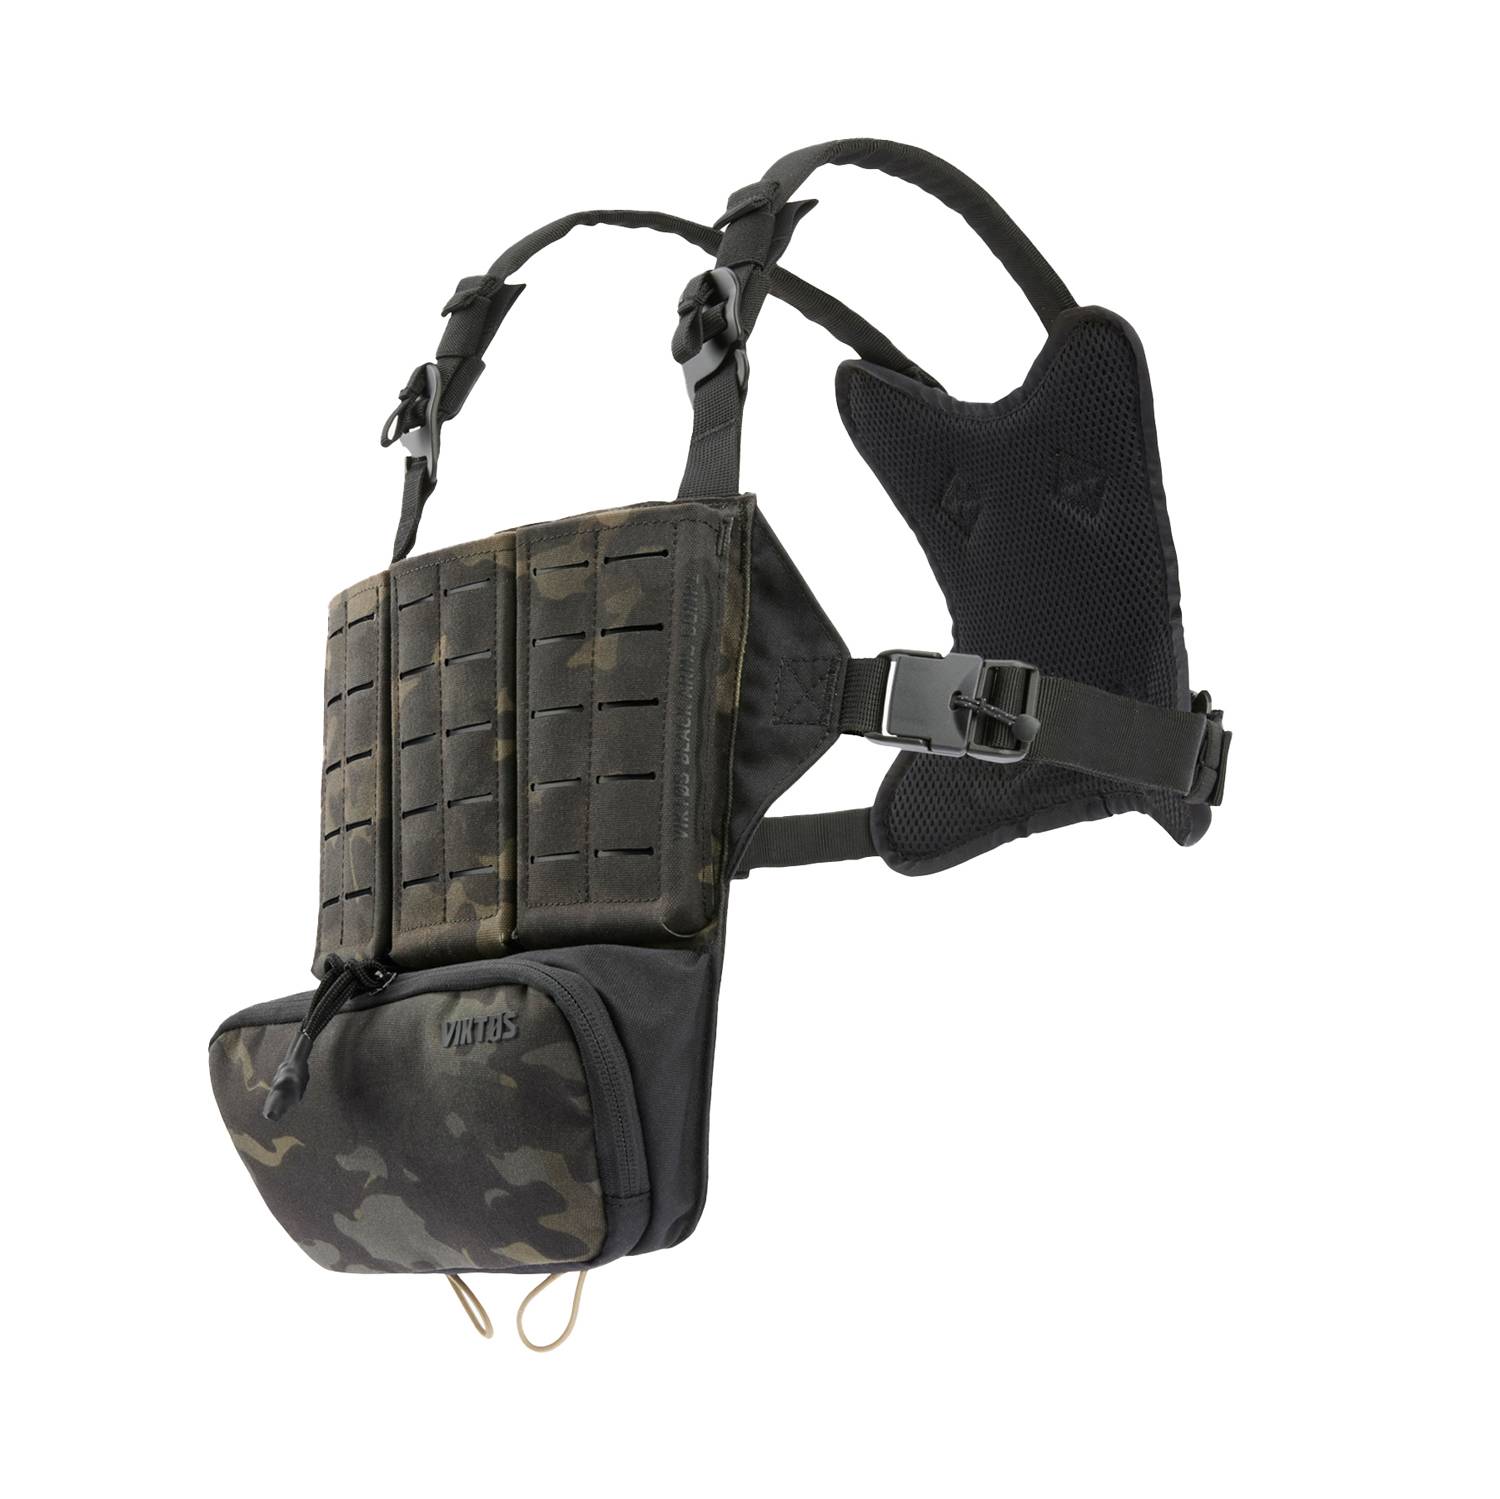 VIKTOS Taculus Chest Rig | Tactical Chest Rigs